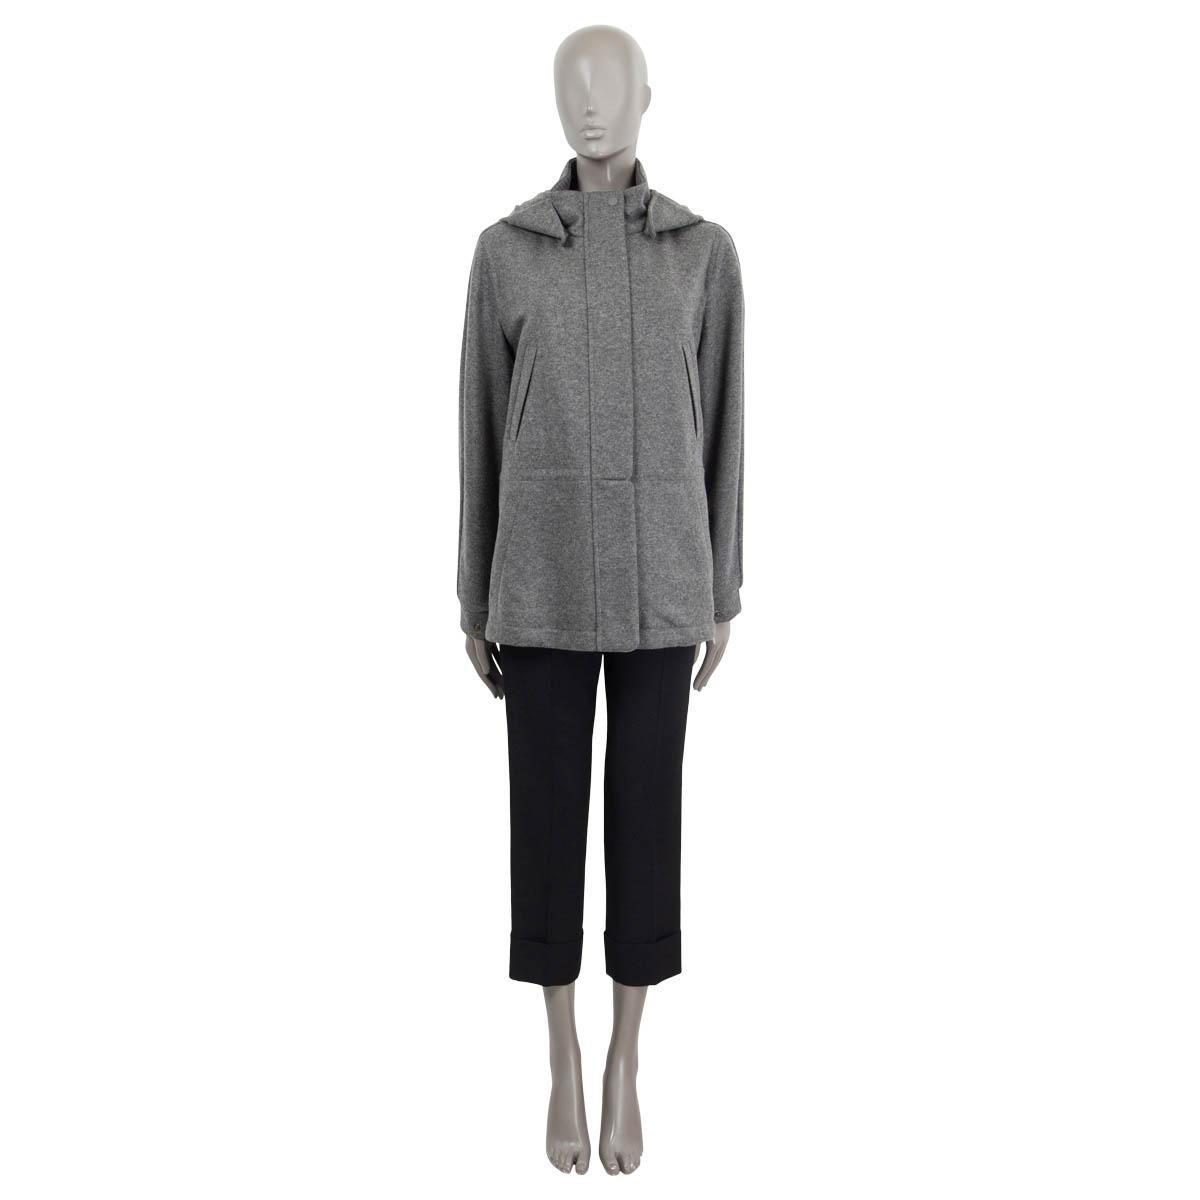 100% authentic Loro Piana 'Icery' hooded knit jacket in grey melange cashmere (100%) treated with waterproof, wind-resistant Storm System. Features four slit pockets on the front and a concealed drawstring at the waist. Closes with a zipper and